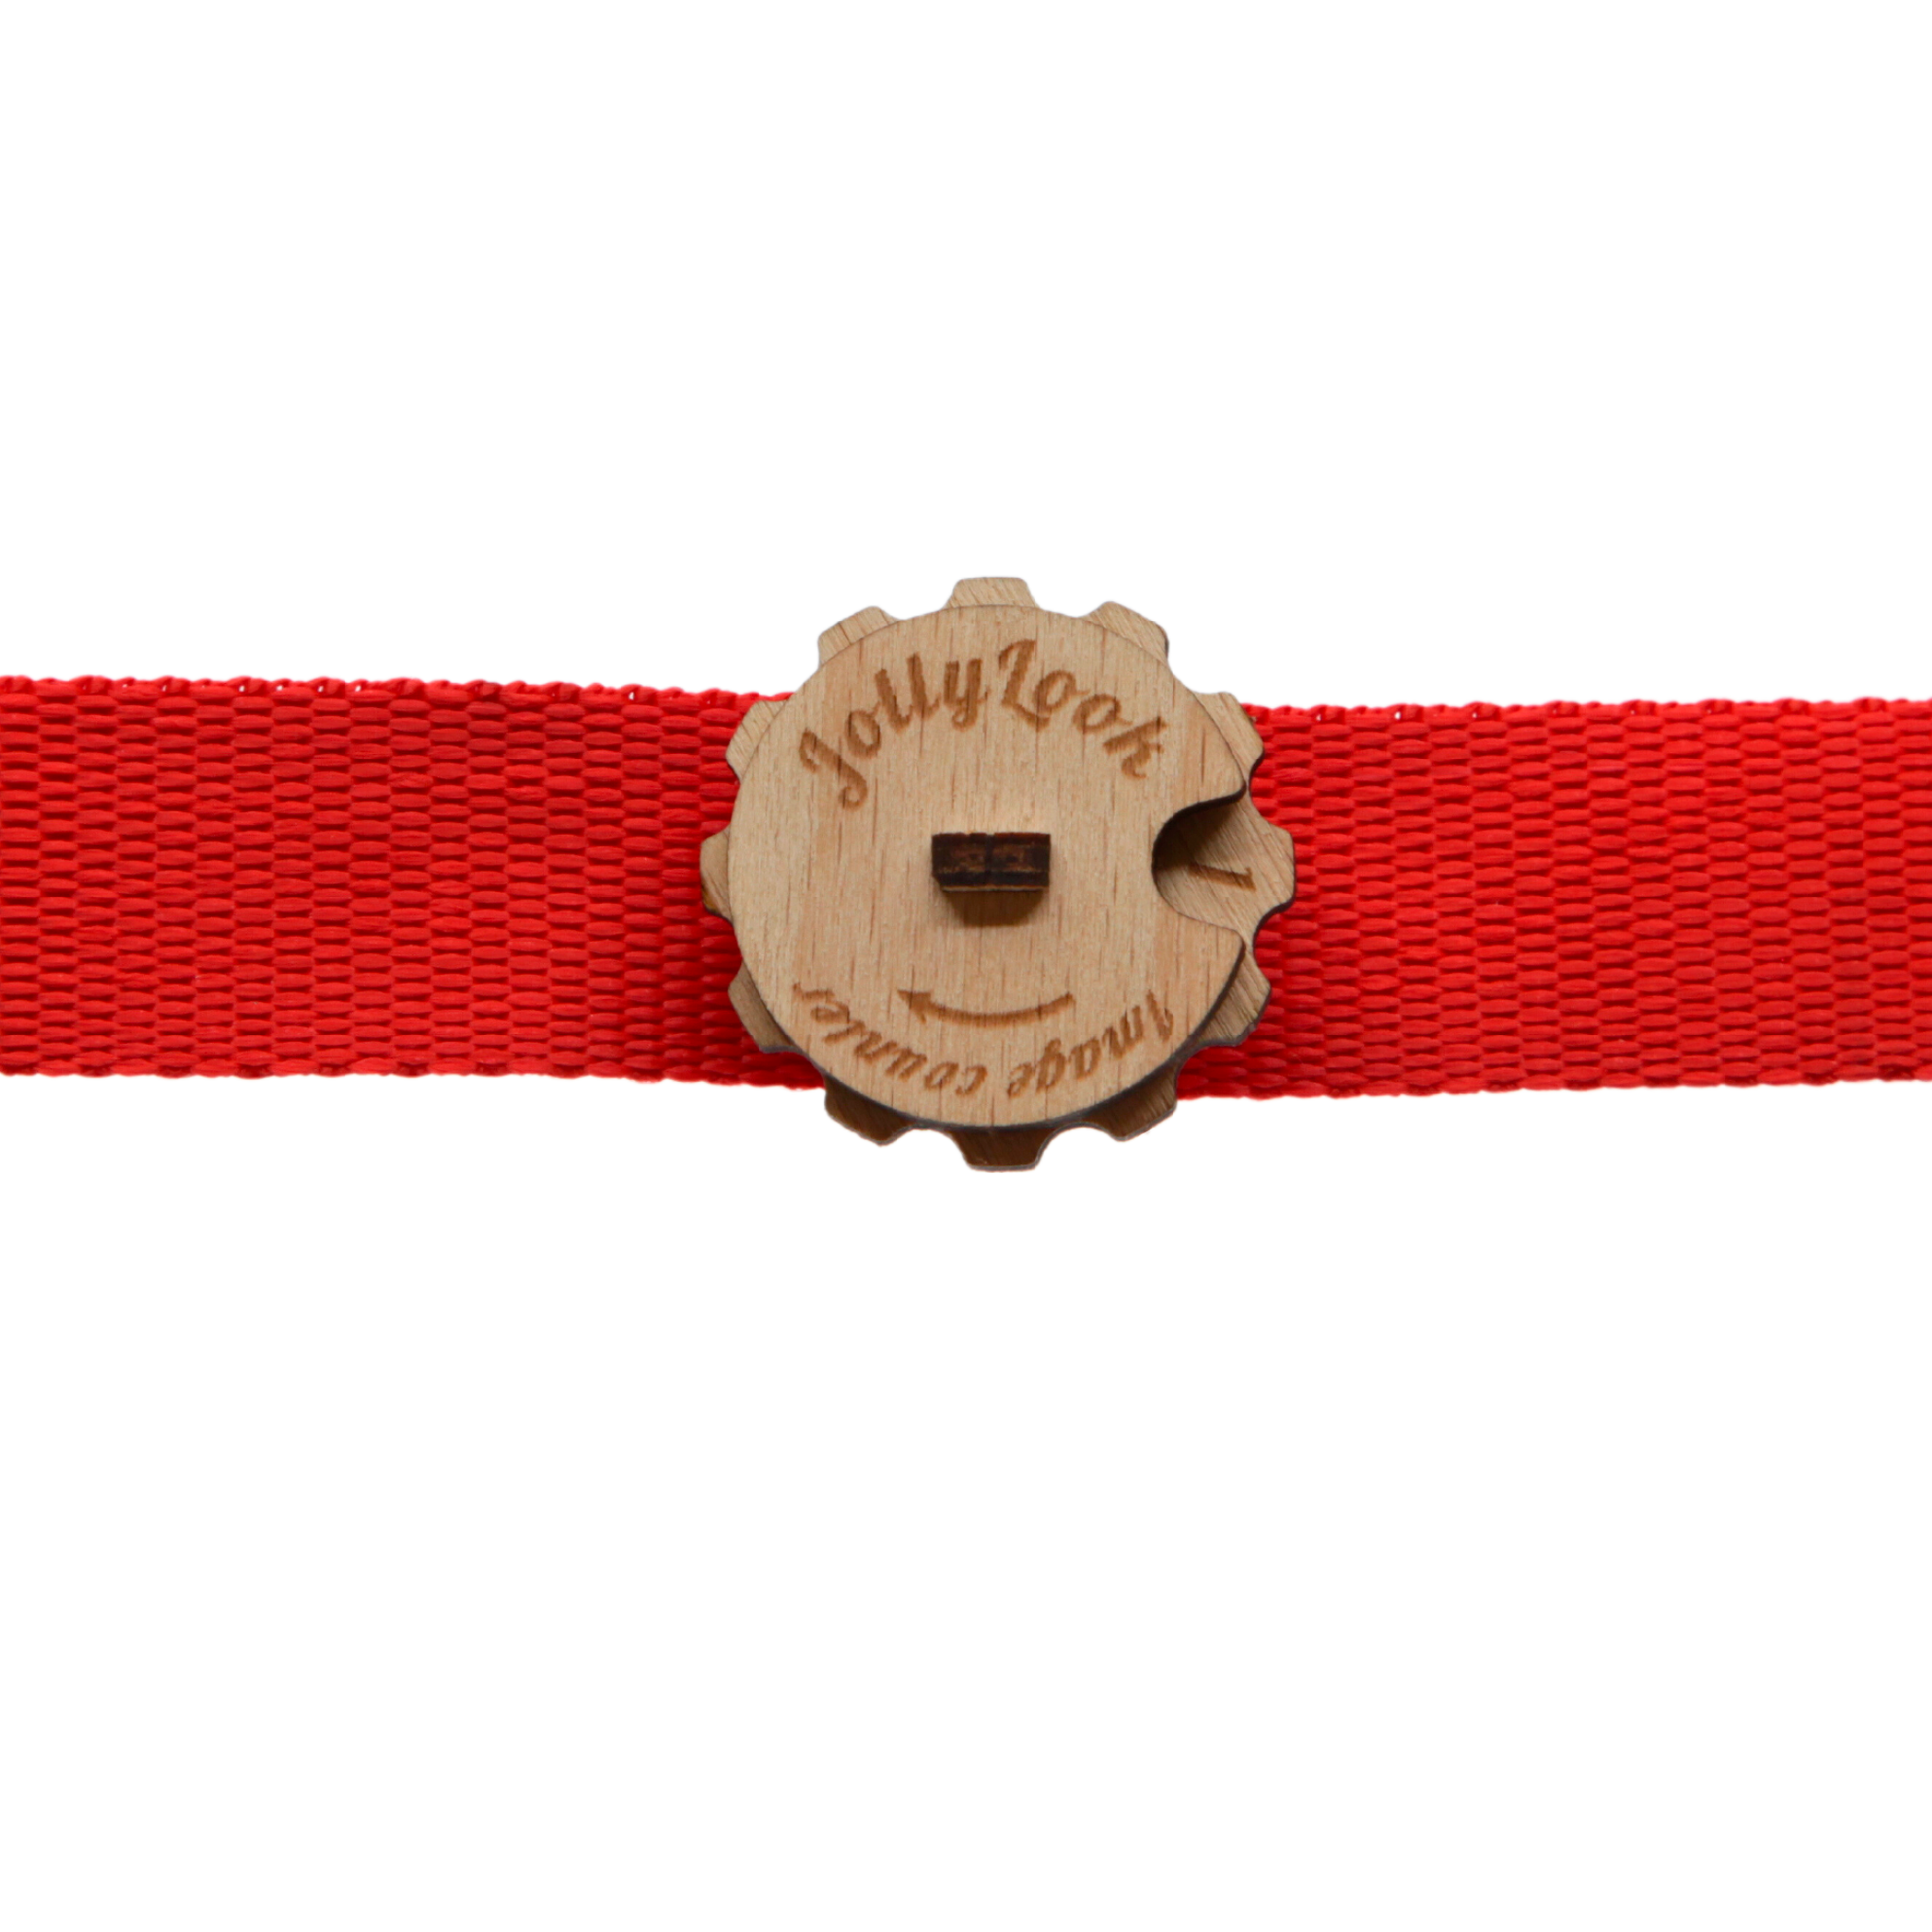 A round wooden image counter in Natural Wood Color featuring the Jollylook logo on a red strap for keeping track of how many images remain in your Instax film cartridge